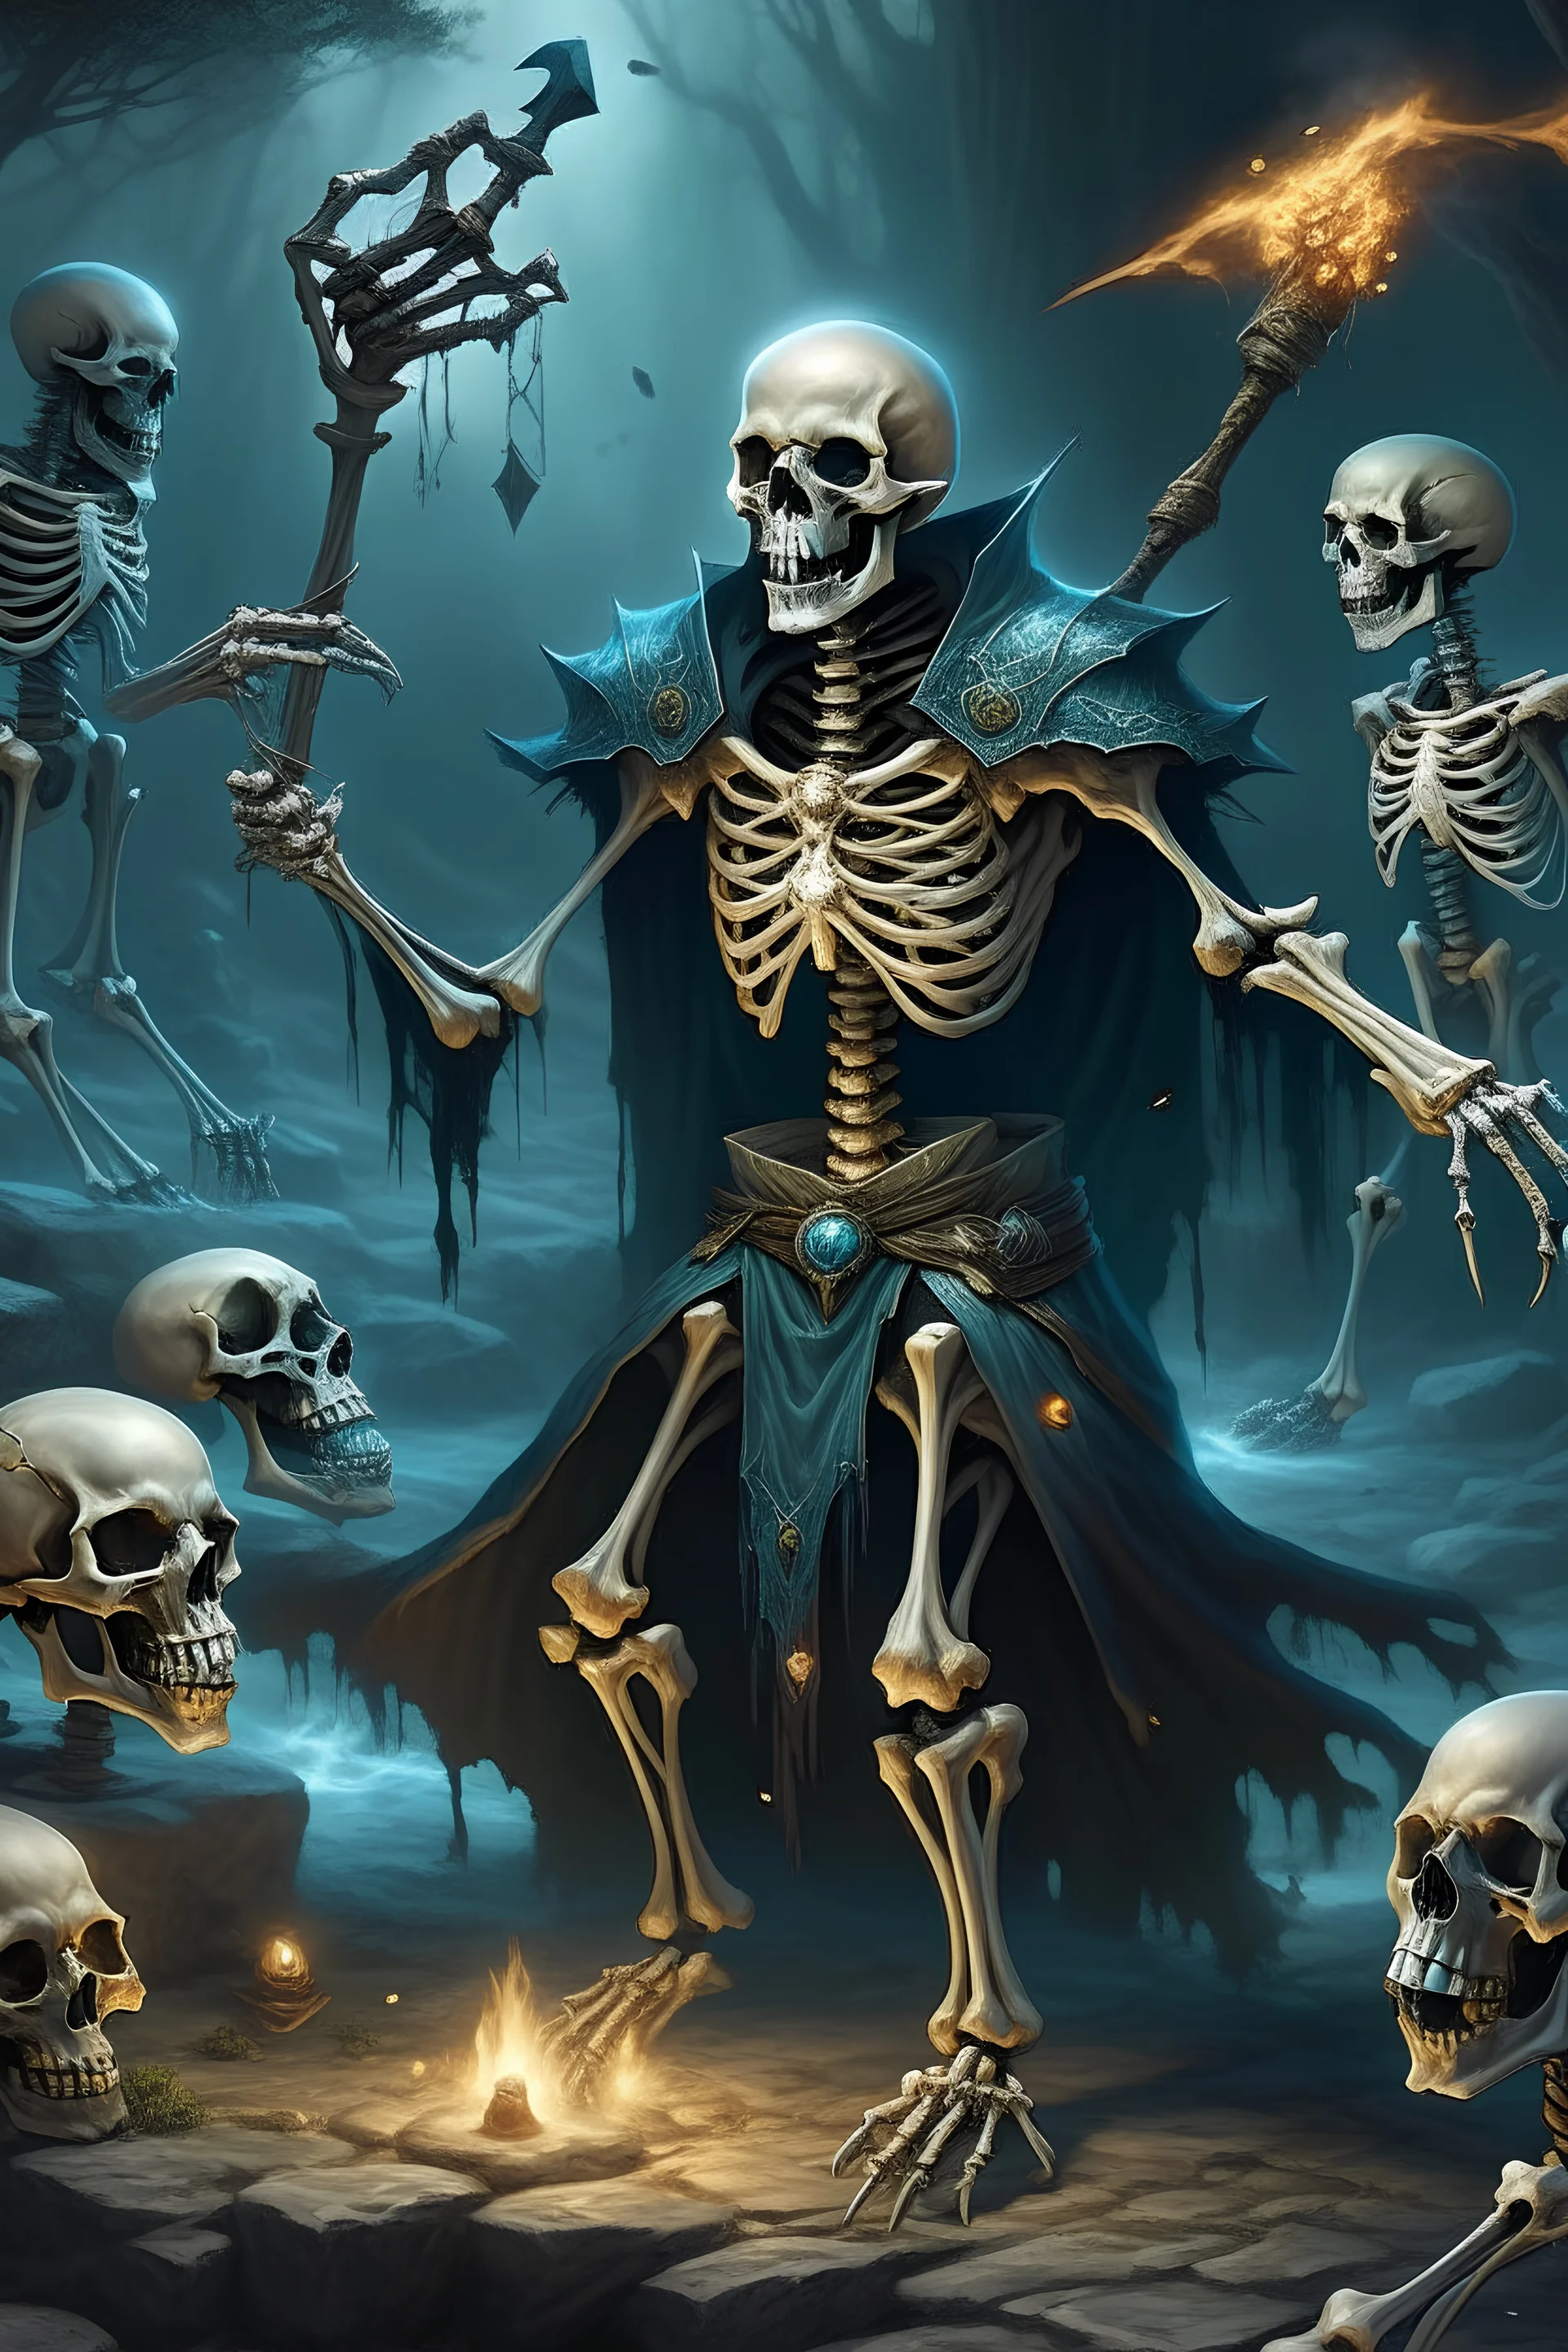 Human Wizard necromancer, skeletons crawling up from graves, fantasy, magic, detailed, dungeons and dragons style